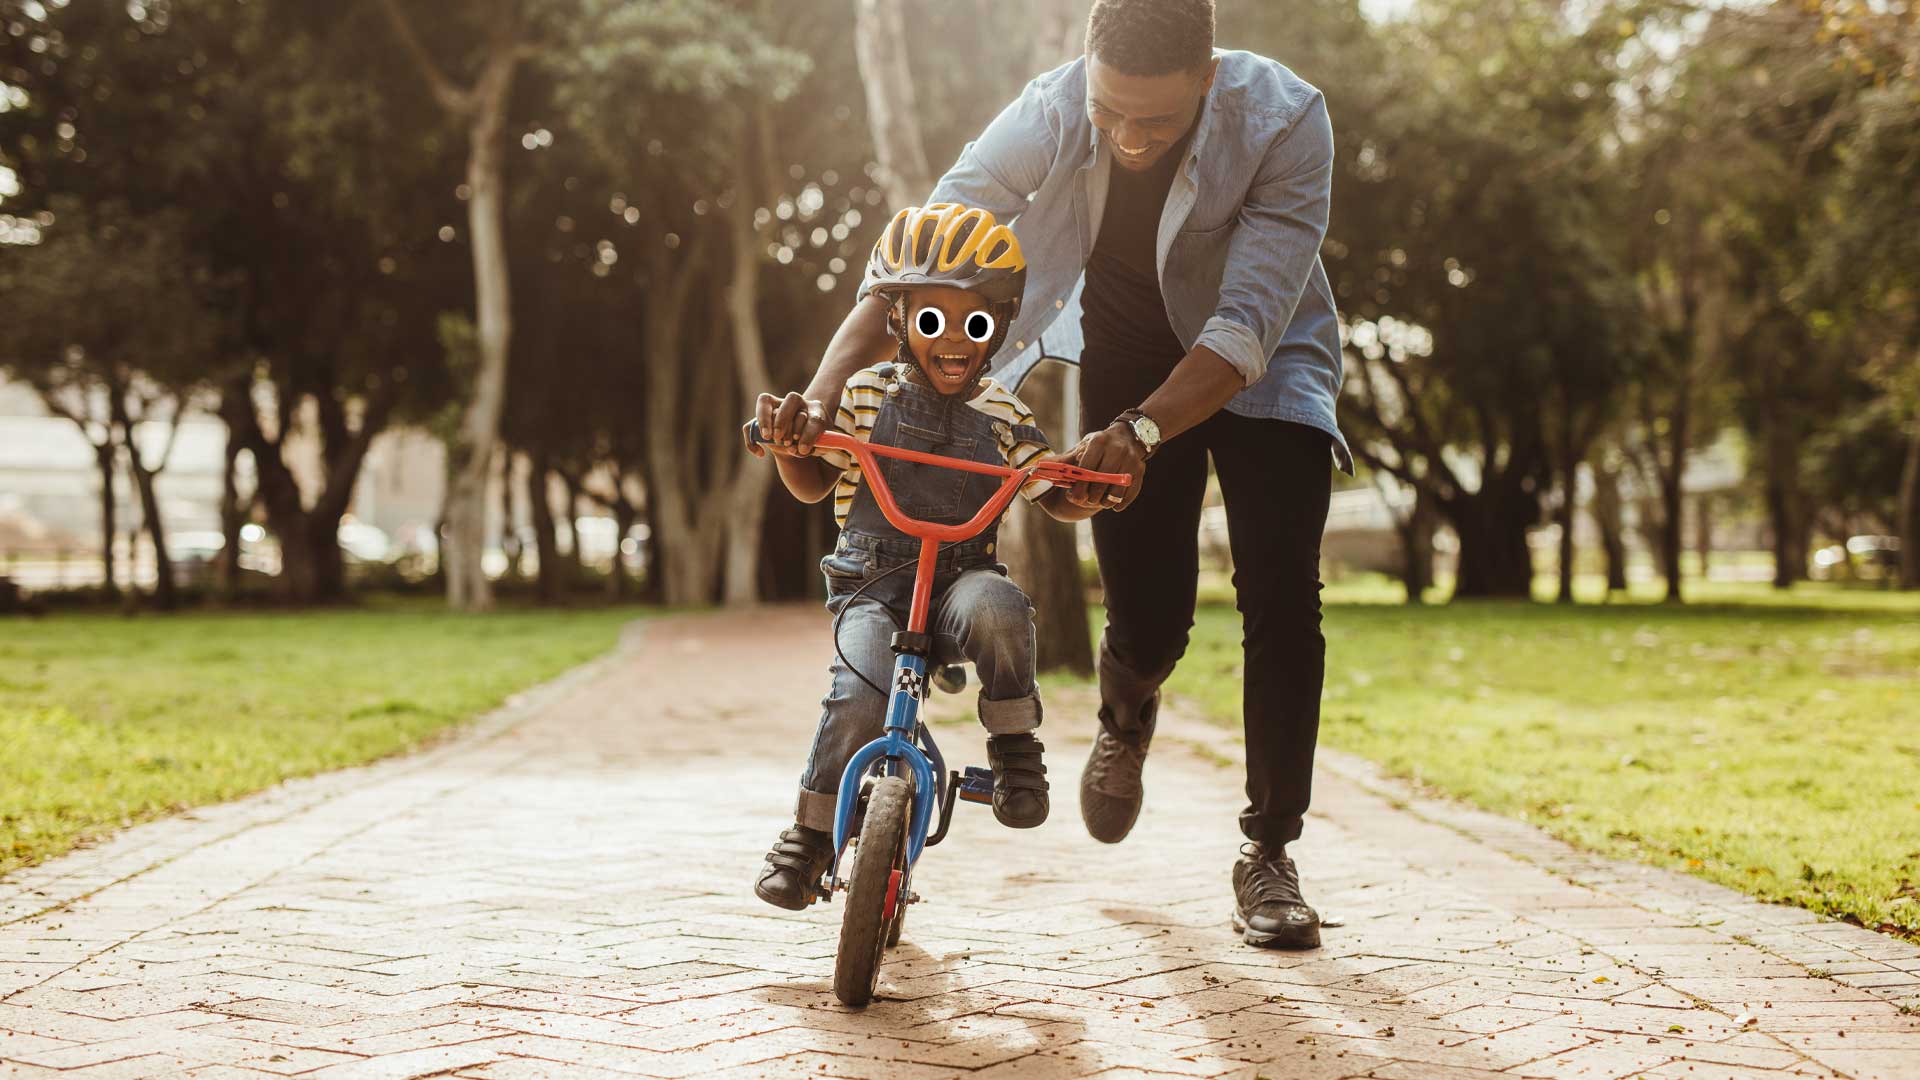 A father and son having fun on a bike